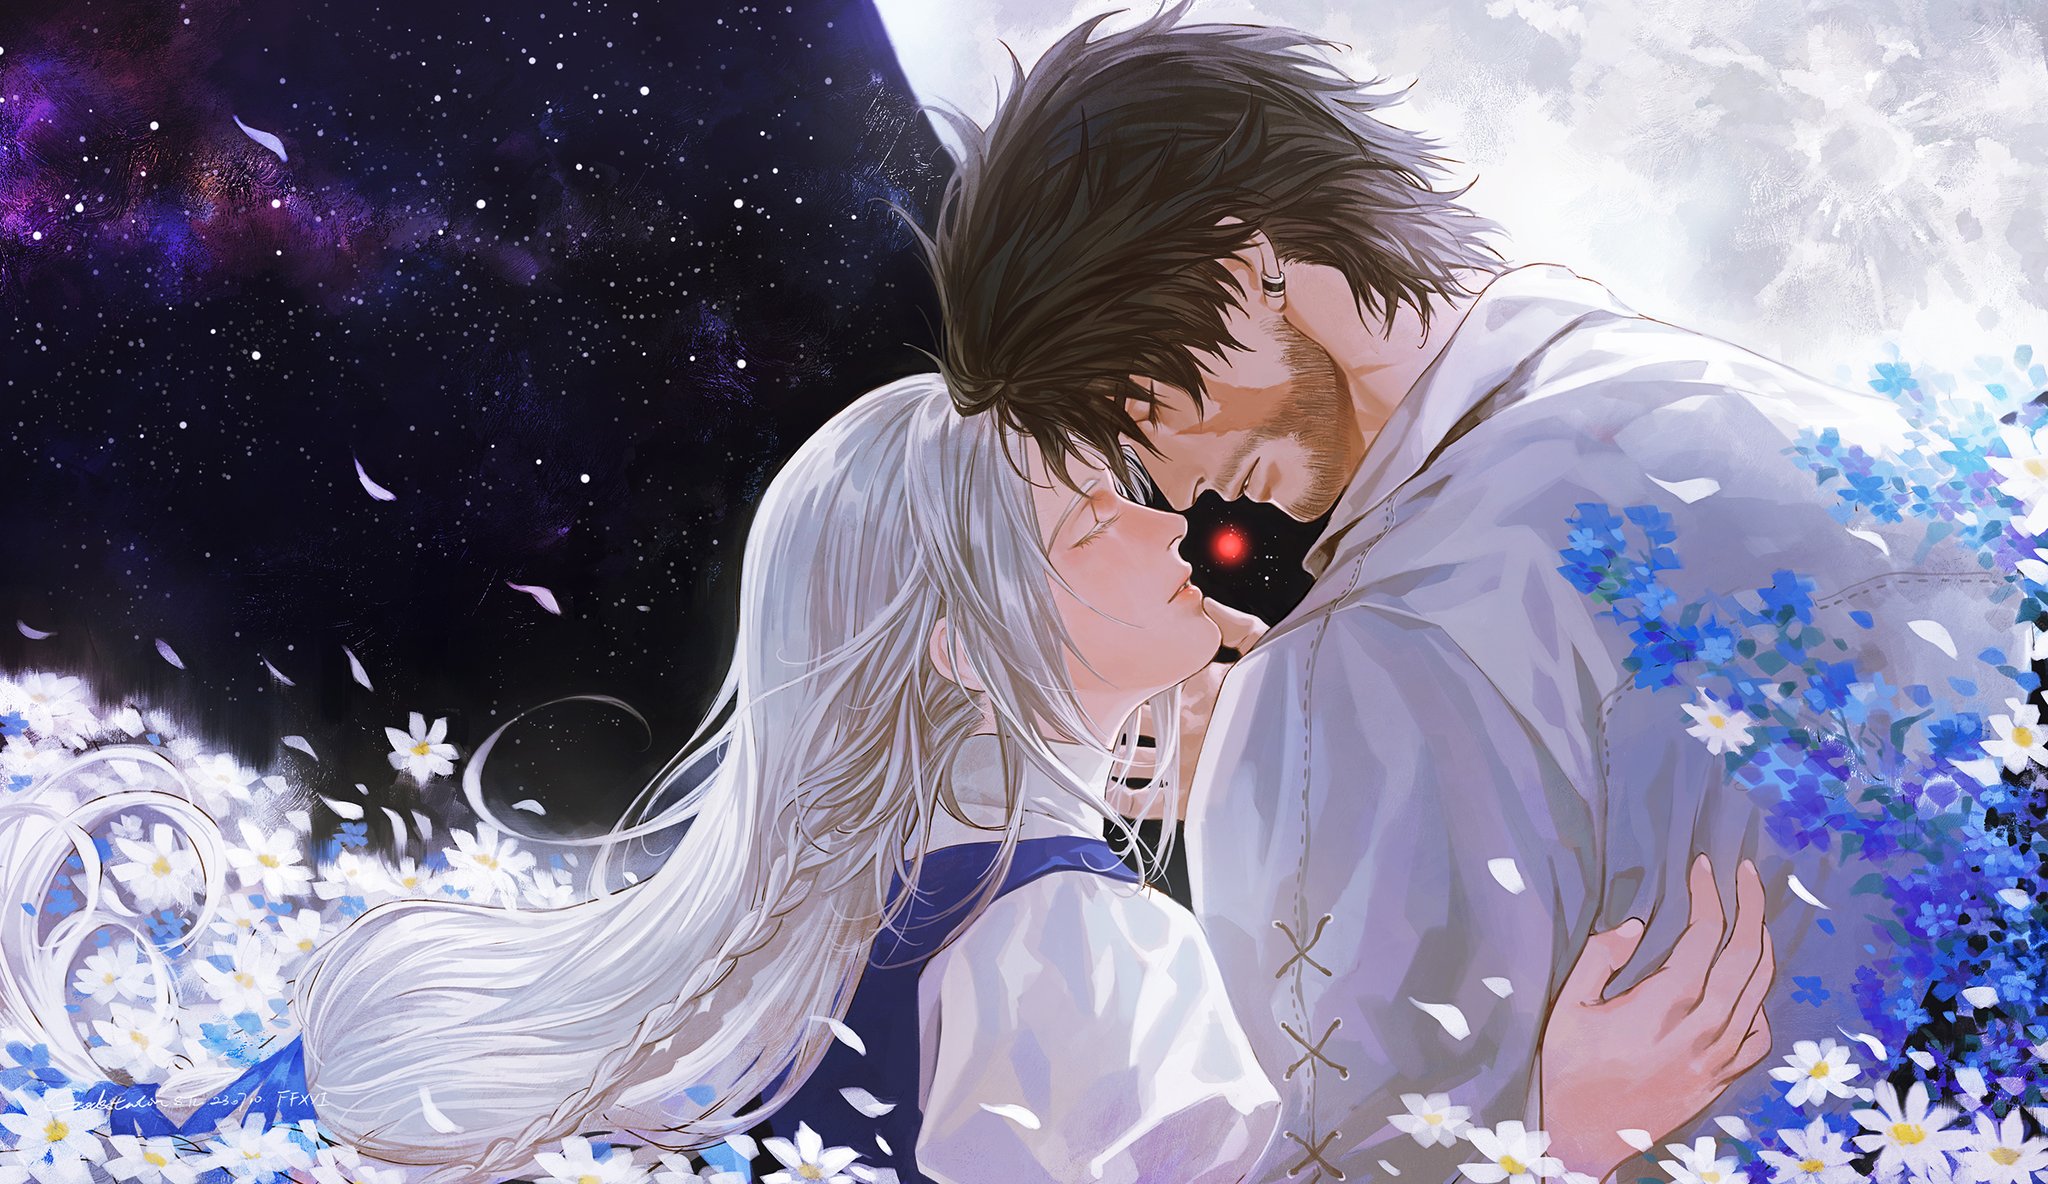 Another Typical Fantasy Romance Manga | Anime-Planet